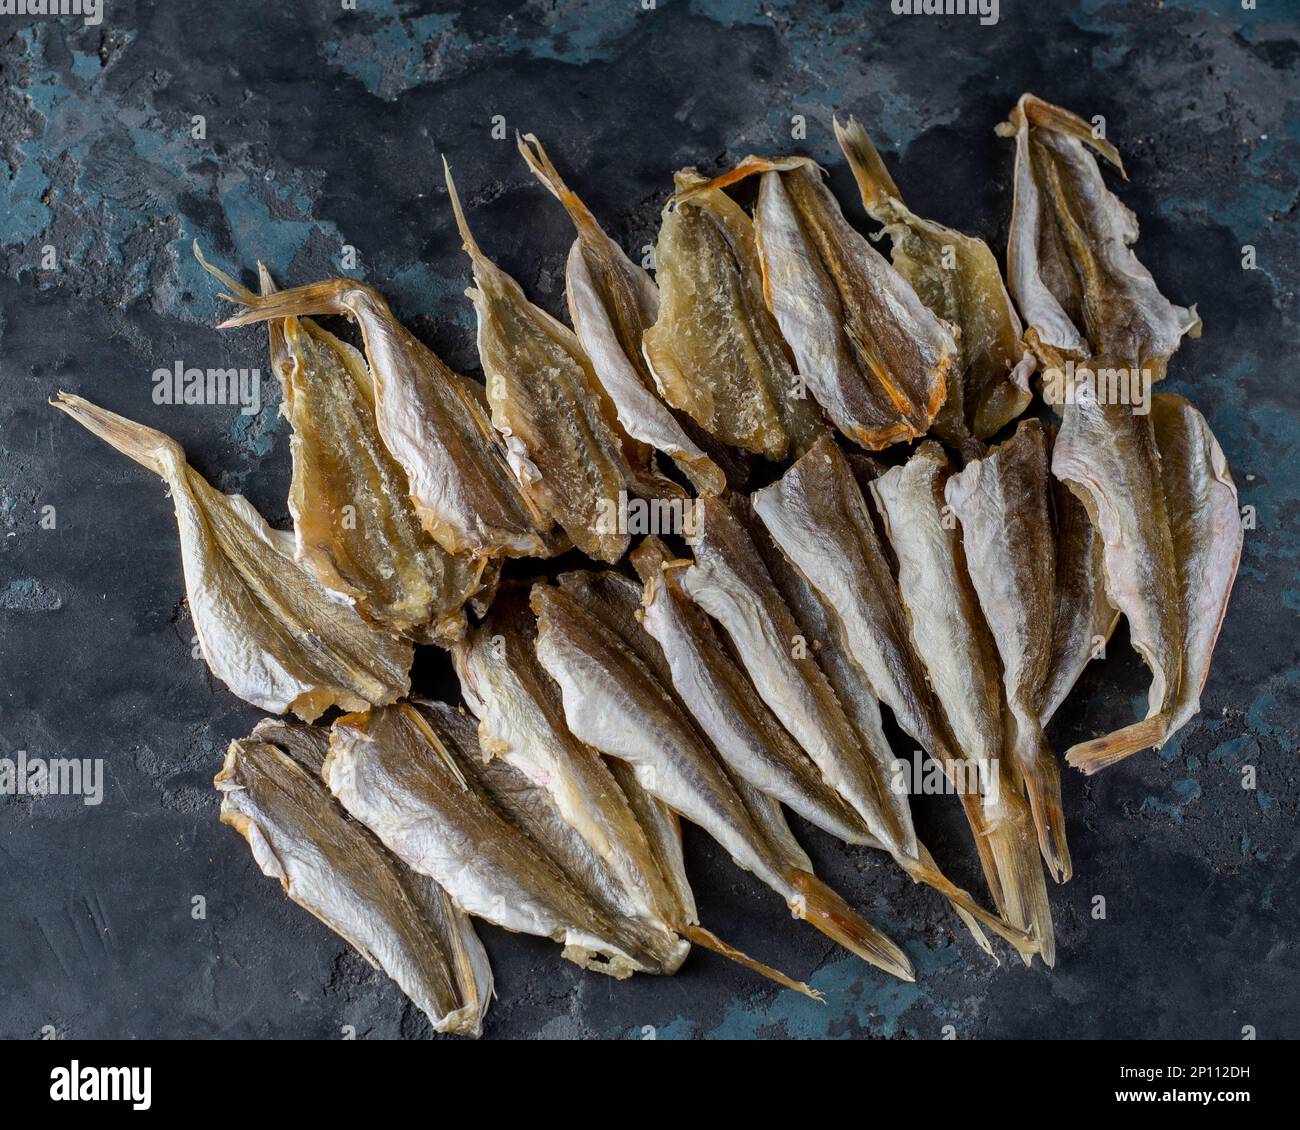 Salted dried horse mackerel, yellow minke fish. Fish appetizer for beer. Stockfish Stock Photo